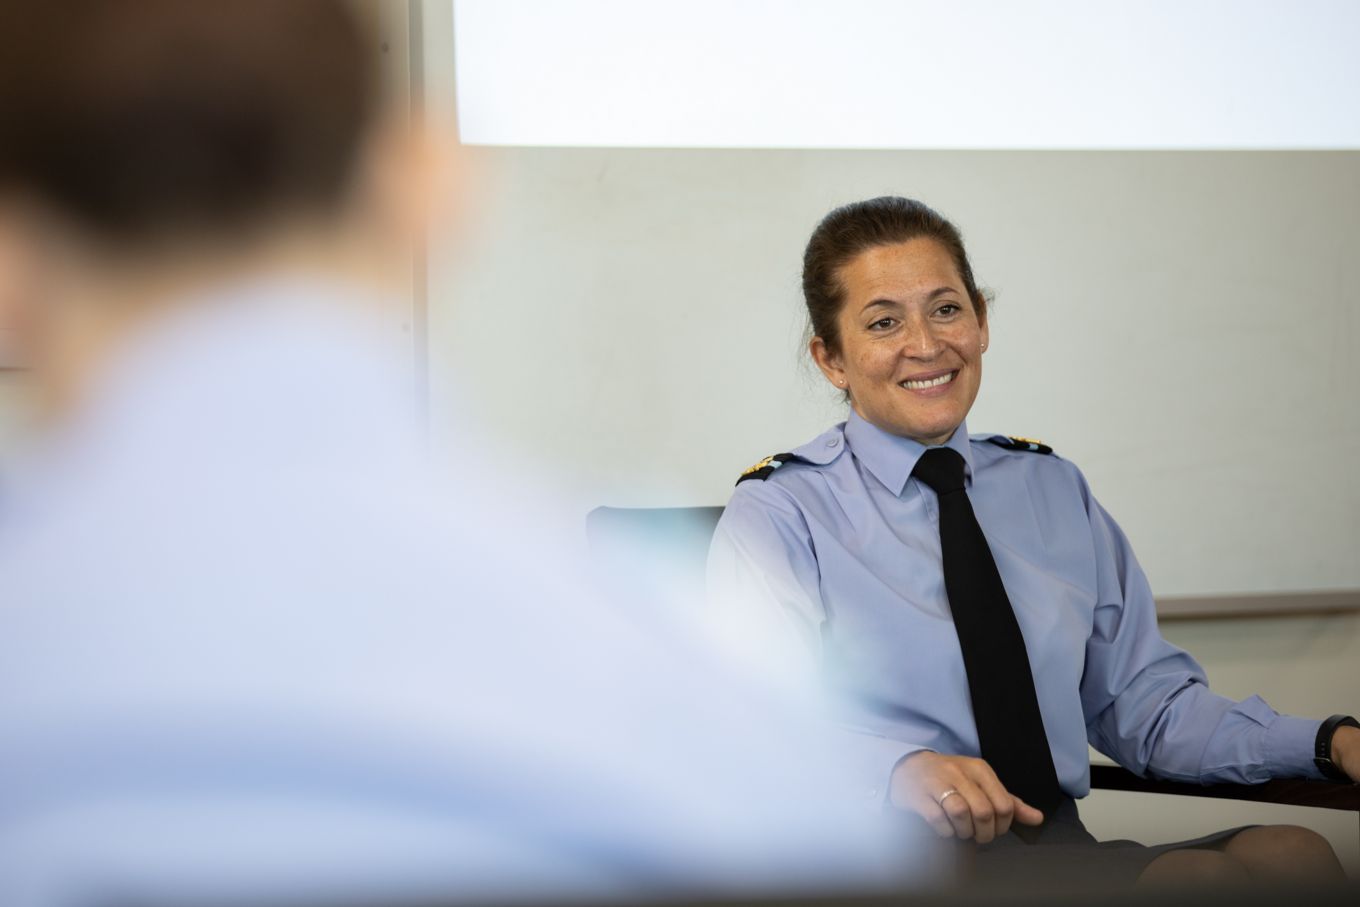 Air Commodore Suraya Marshall in conversation with the ULAS Students